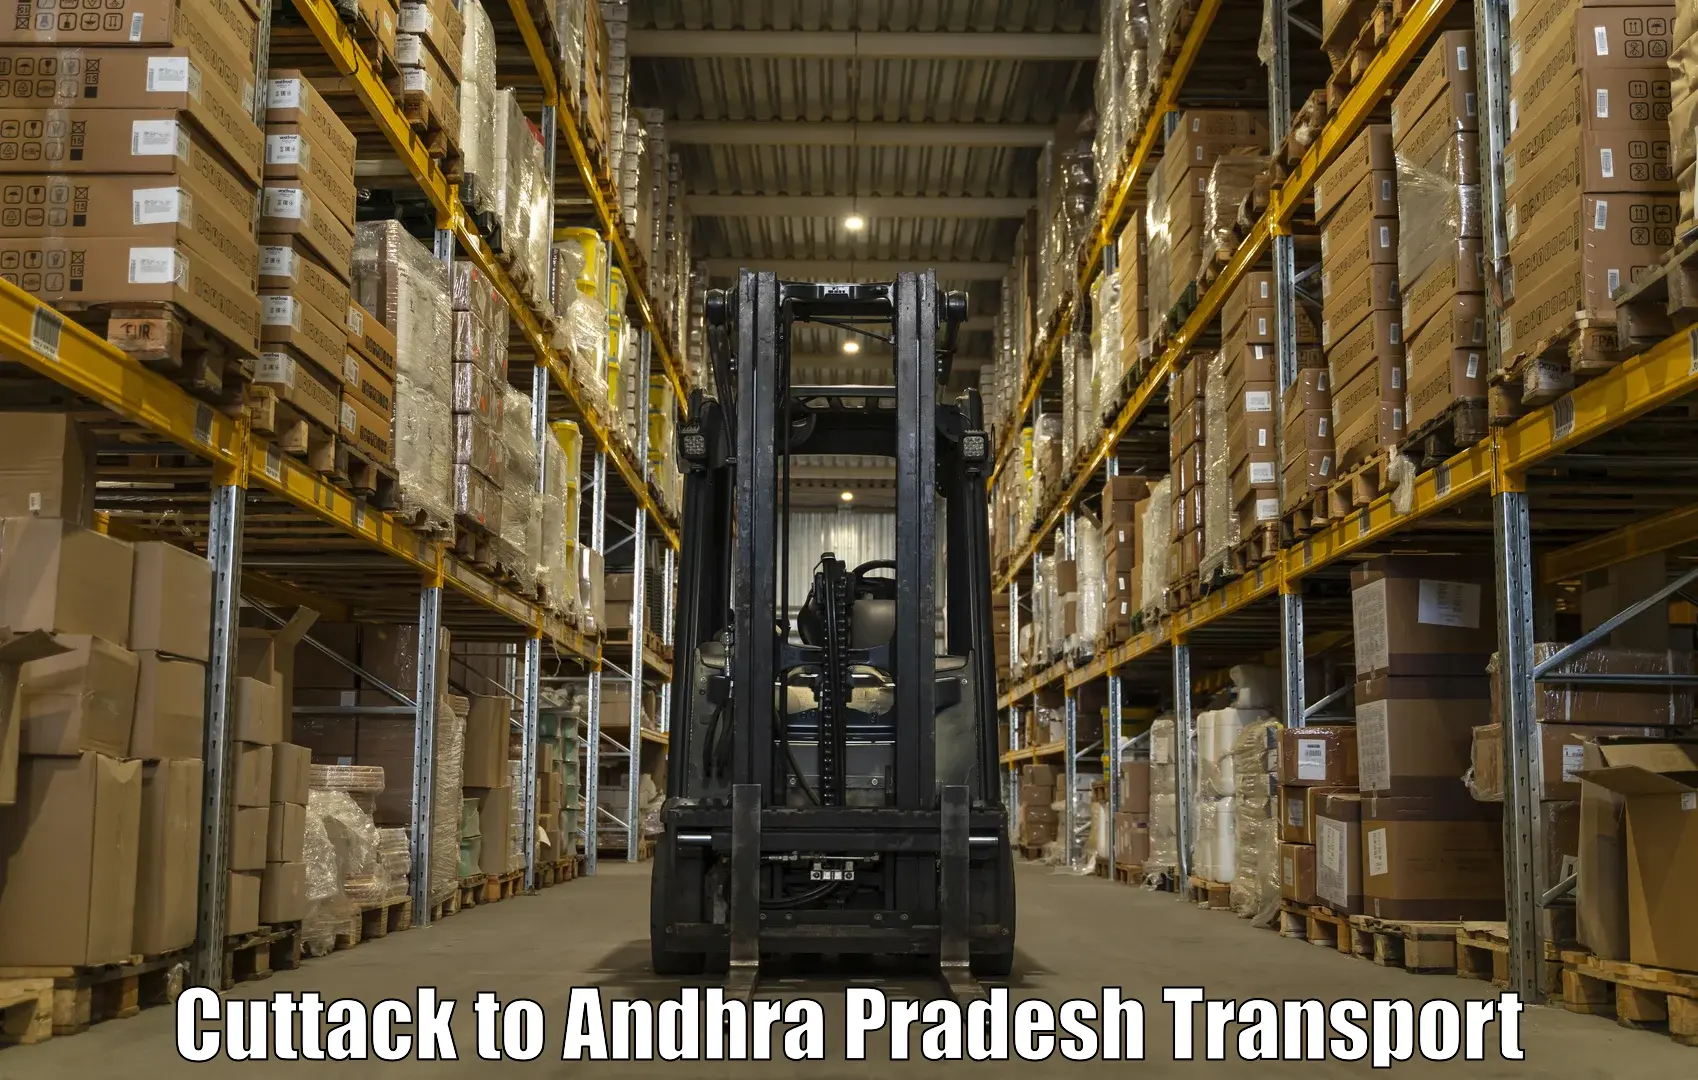 Goods delivery service Cuttack to Sattenapalle